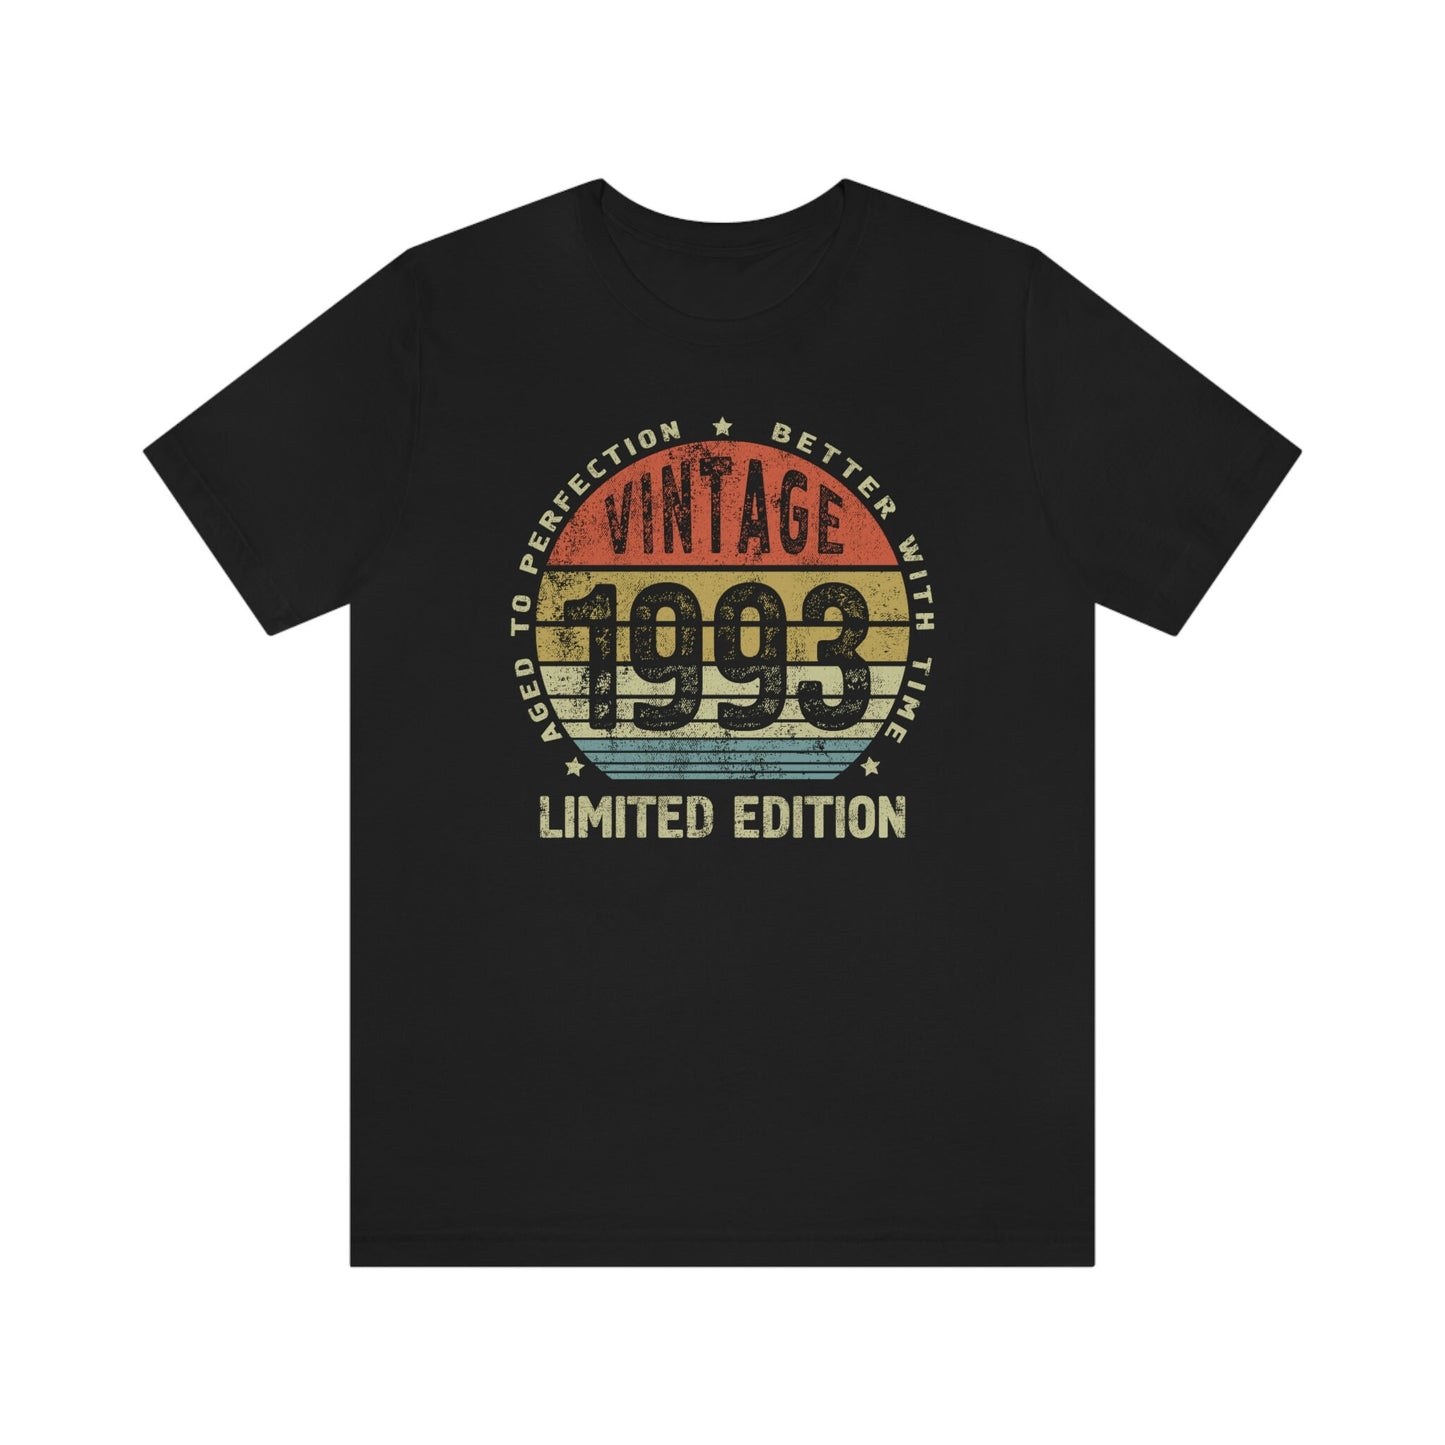 Vintage birthday gift t-shirt for women or men, Born in 1993 gift shirt for sister or brother